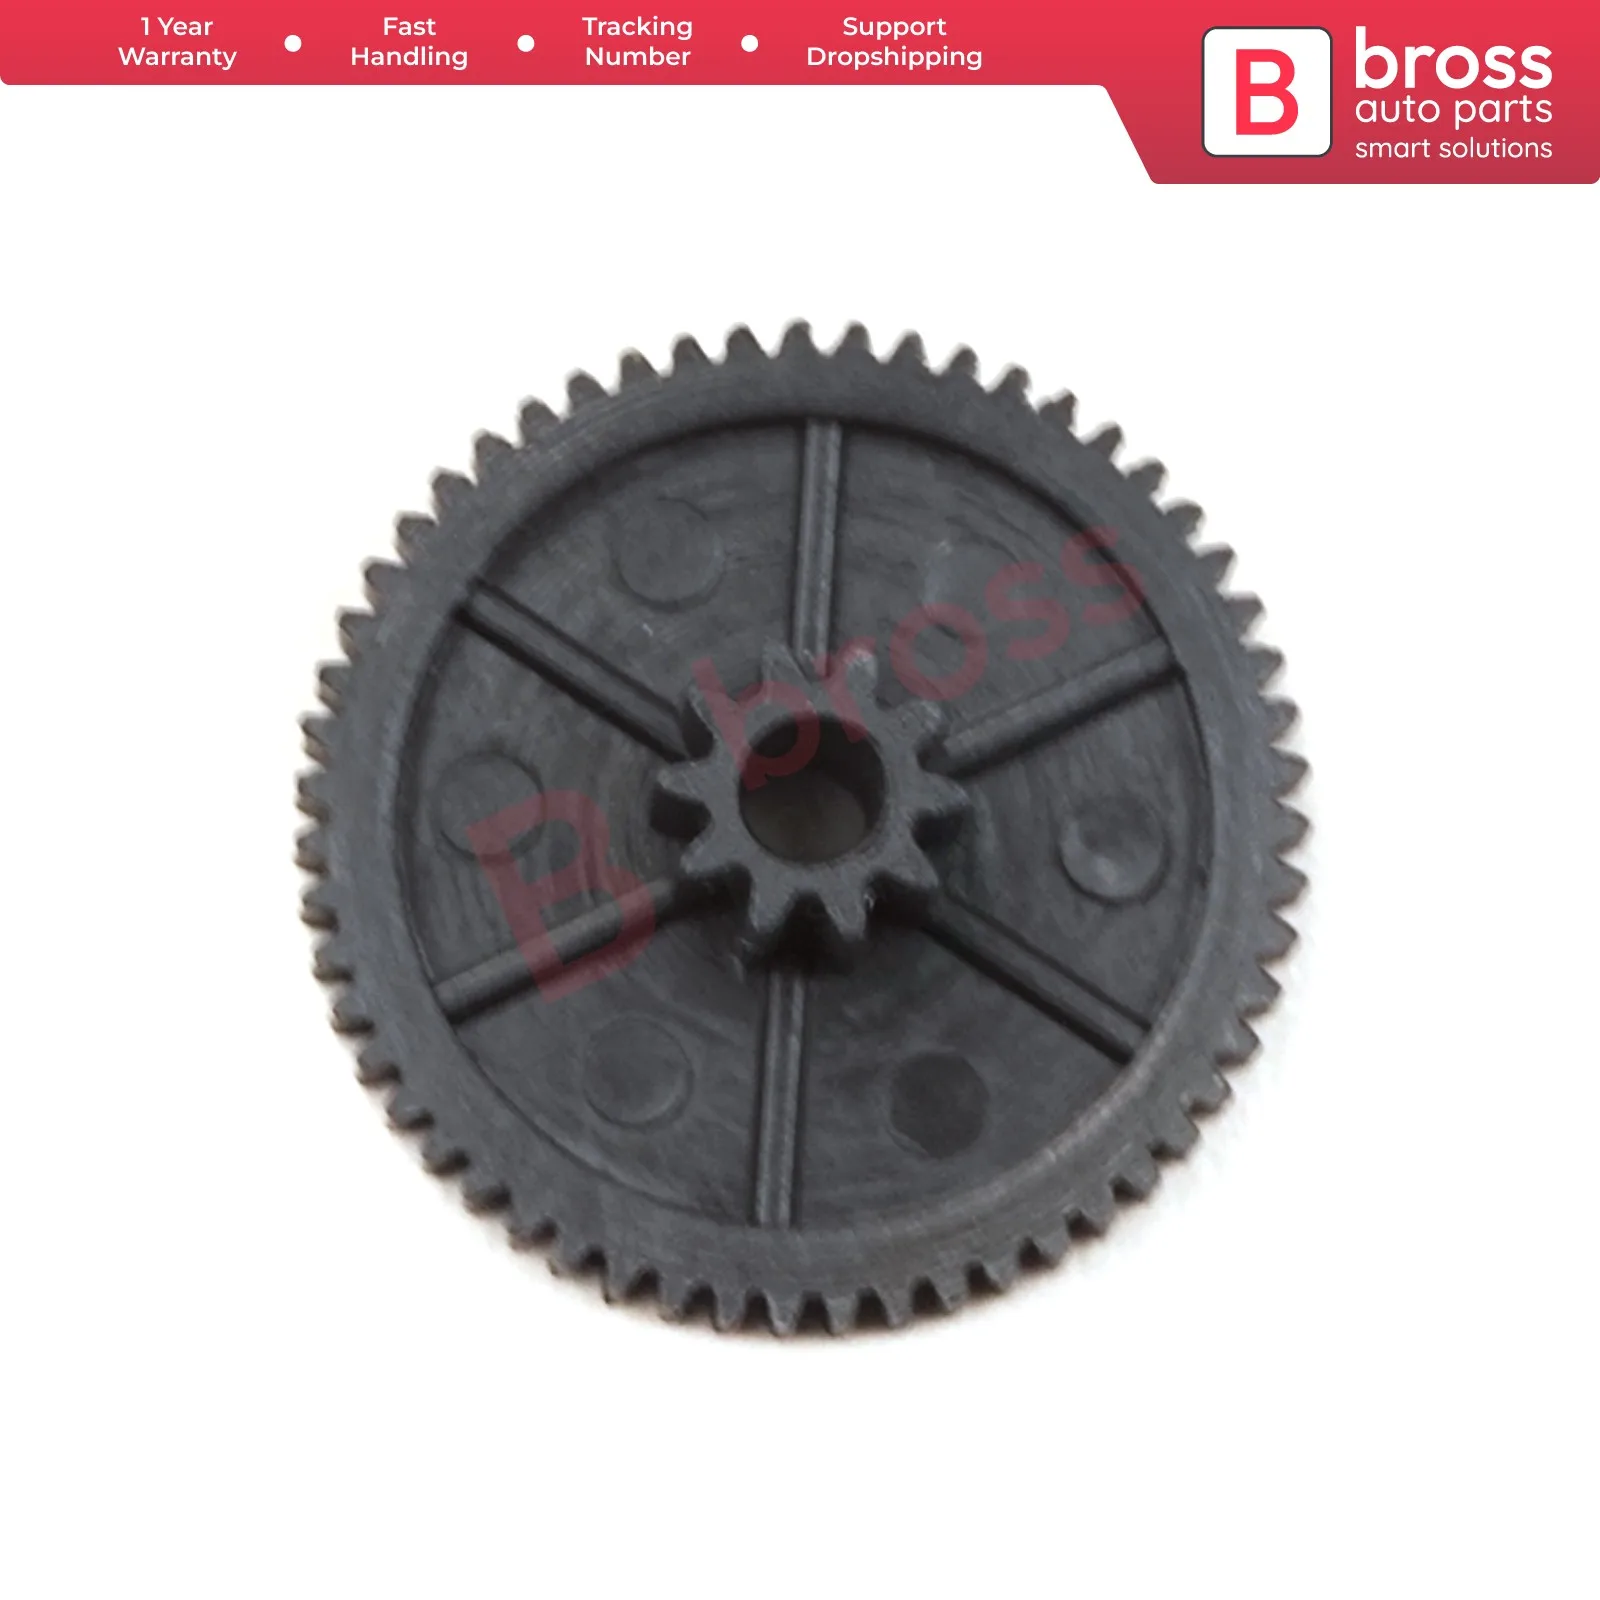 

Bross BGE607 Air Conditioning Motor Repair Gear for Renault Clio Teeth numbers: 56 and 10; Diameter:18.78mm; Thickness: 6.93mm